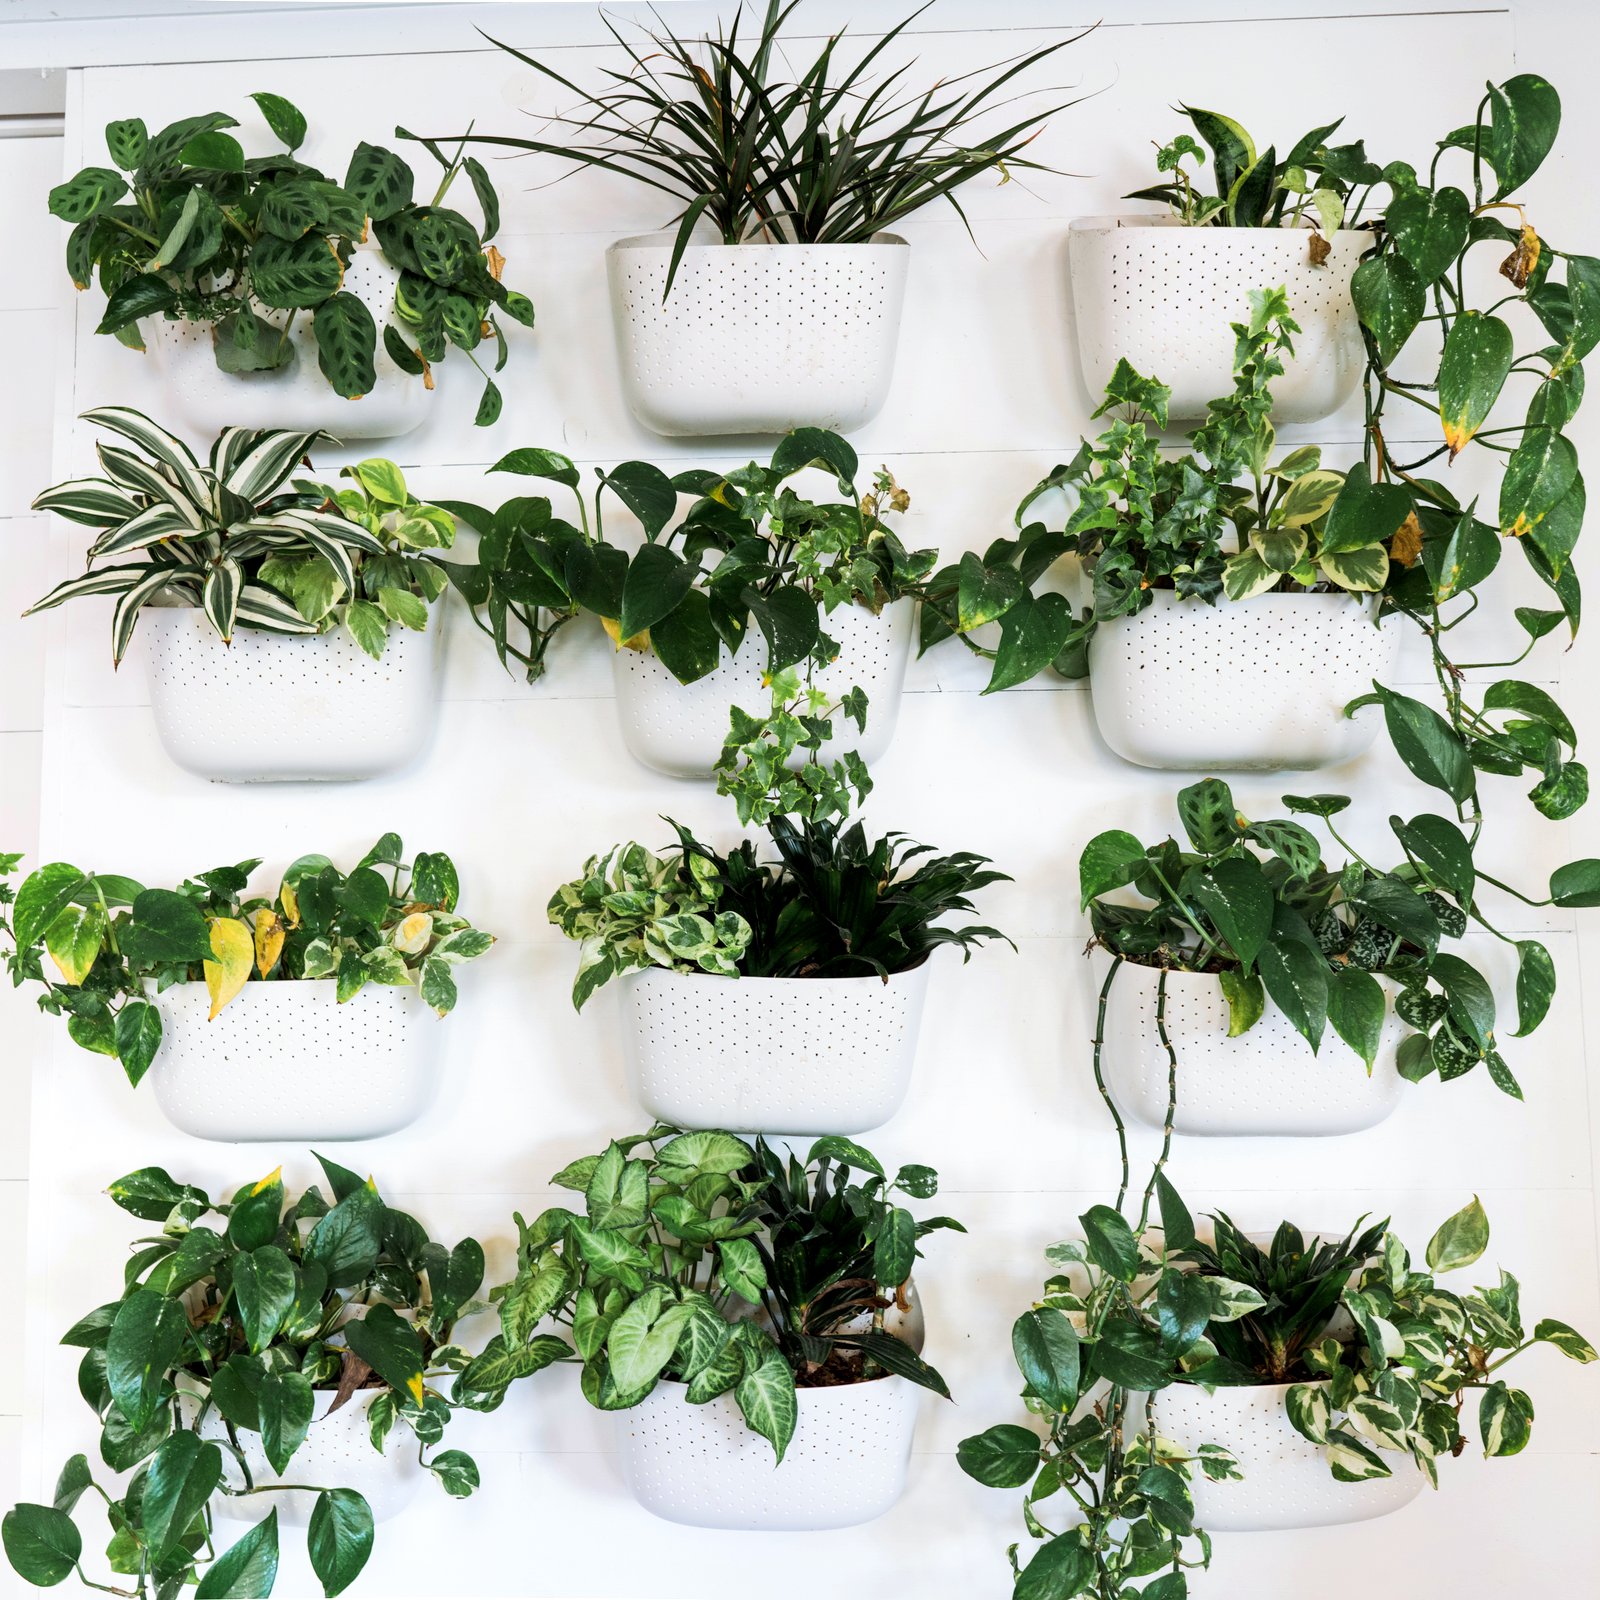 Indoor plants decorating: A wall of simple plastic planter boxes with live green plants